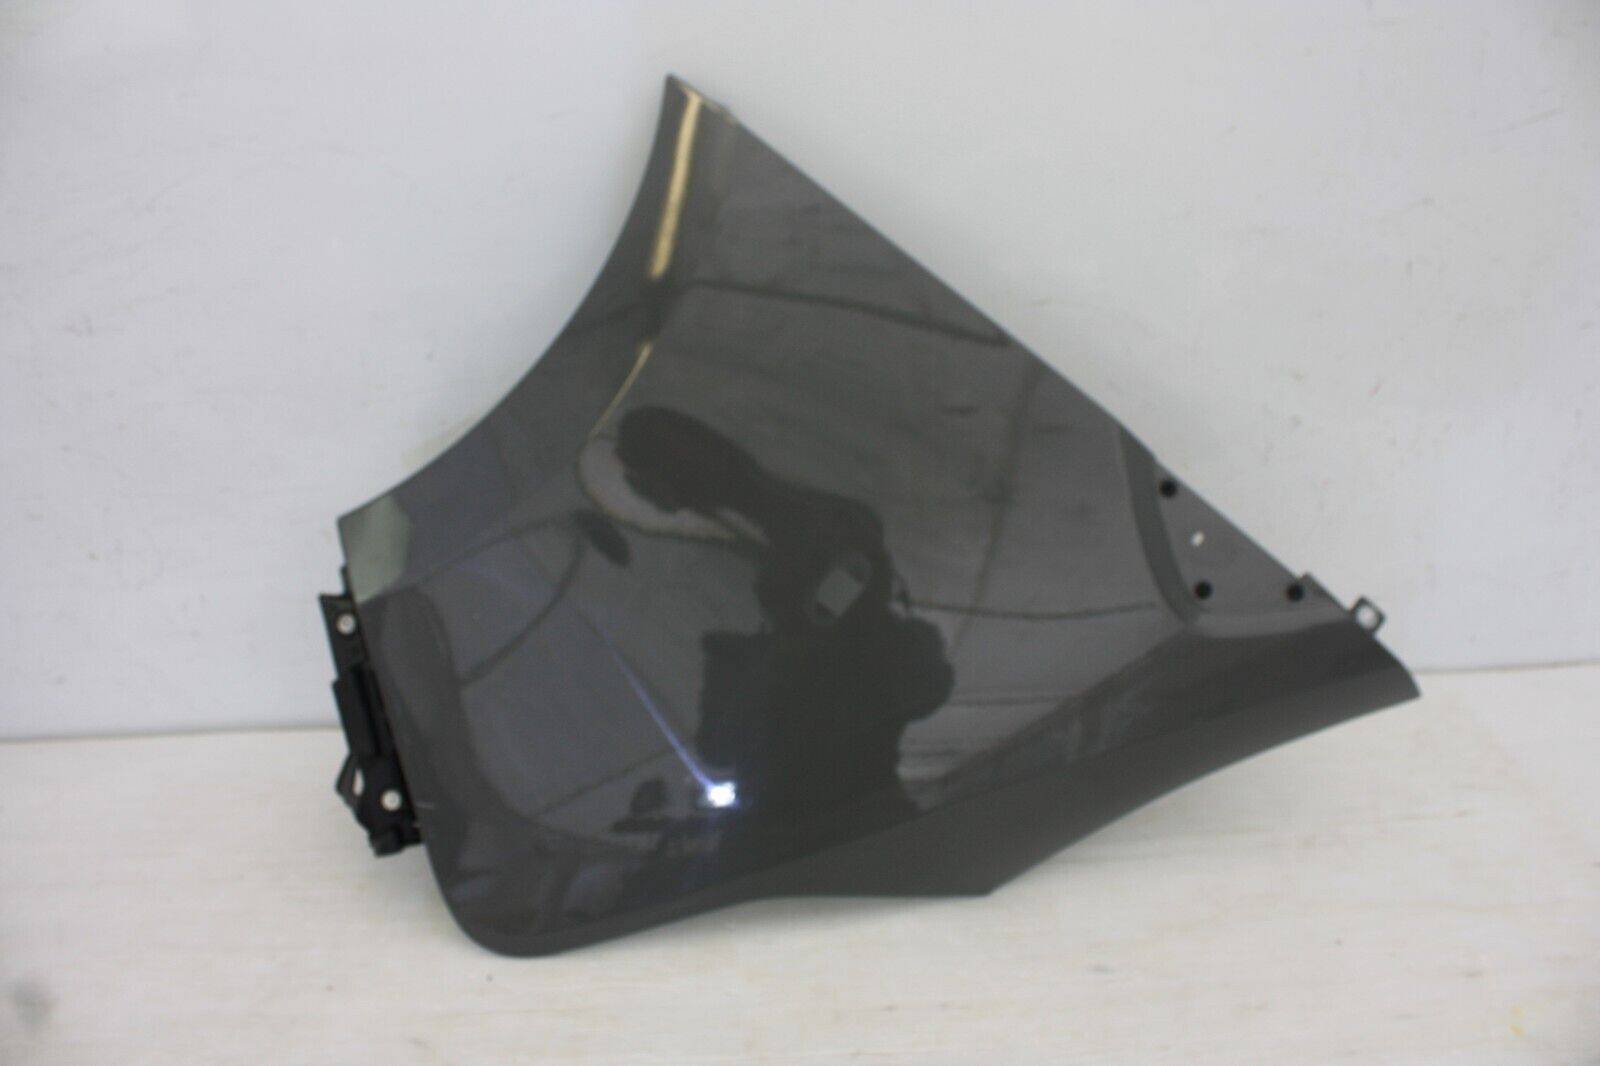 Renault Trafic Front Right Side Wing Genuine 175420625091